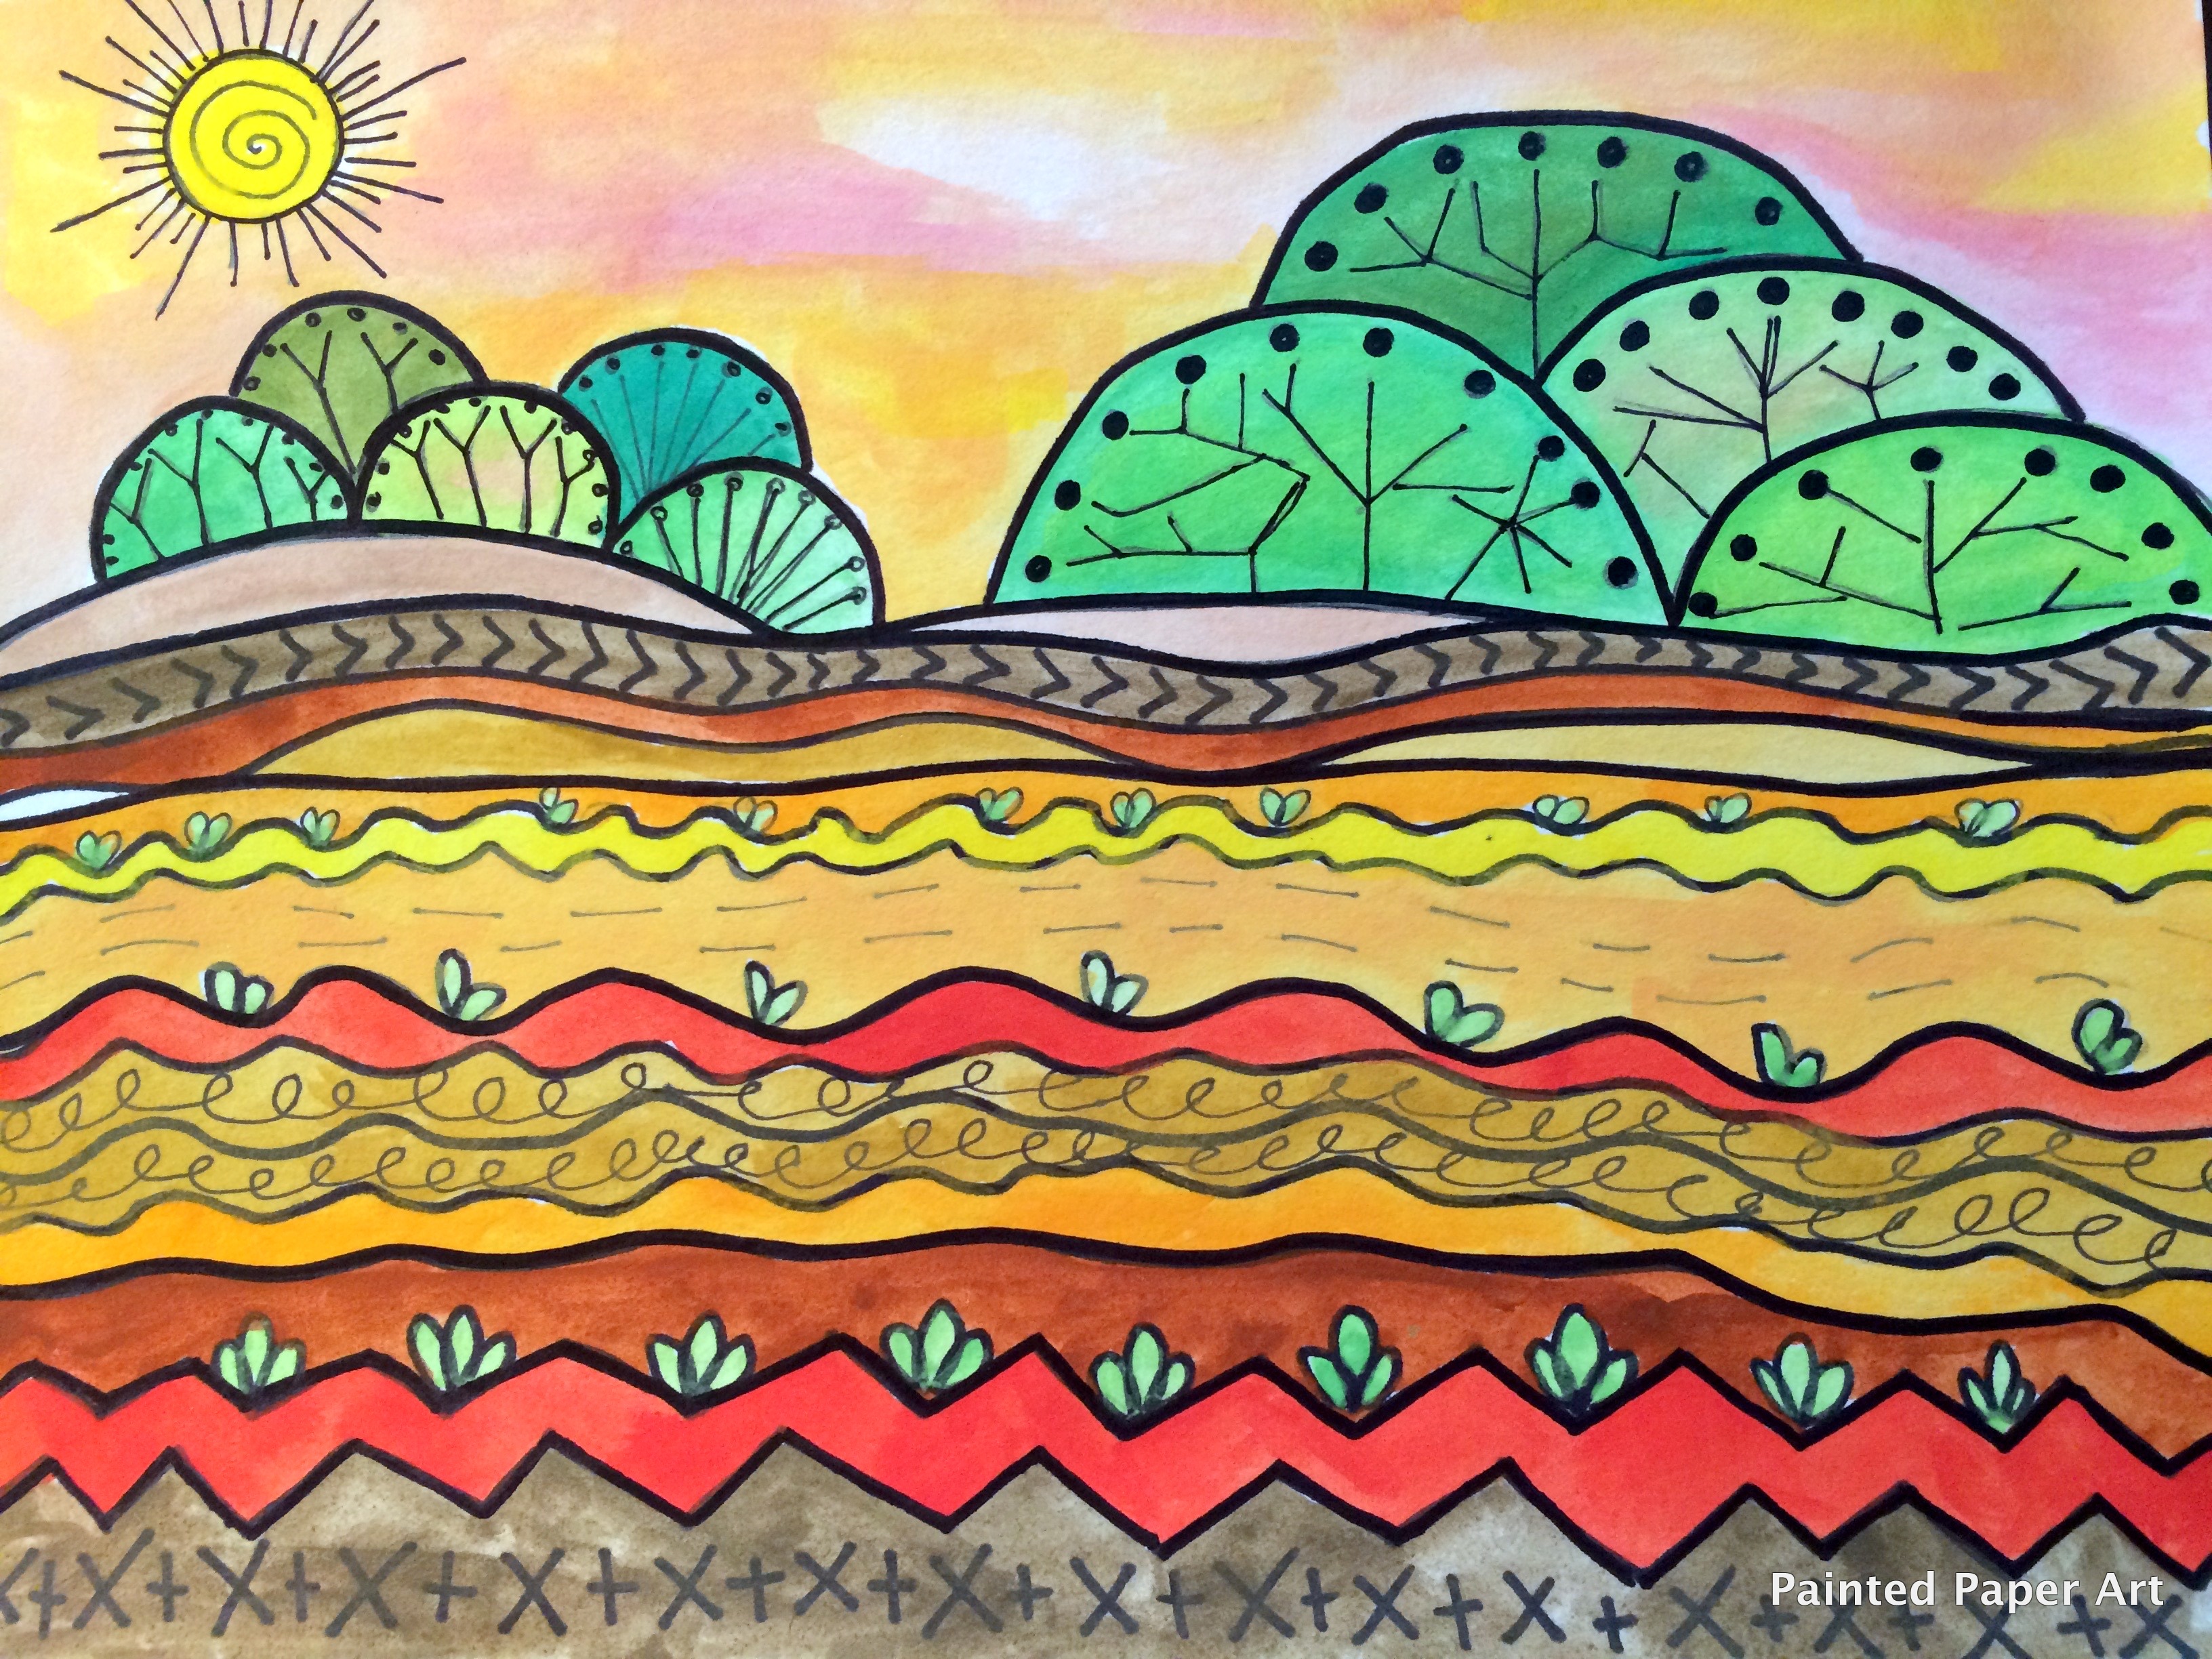 Lines and Landscapes – Painted Paper Art